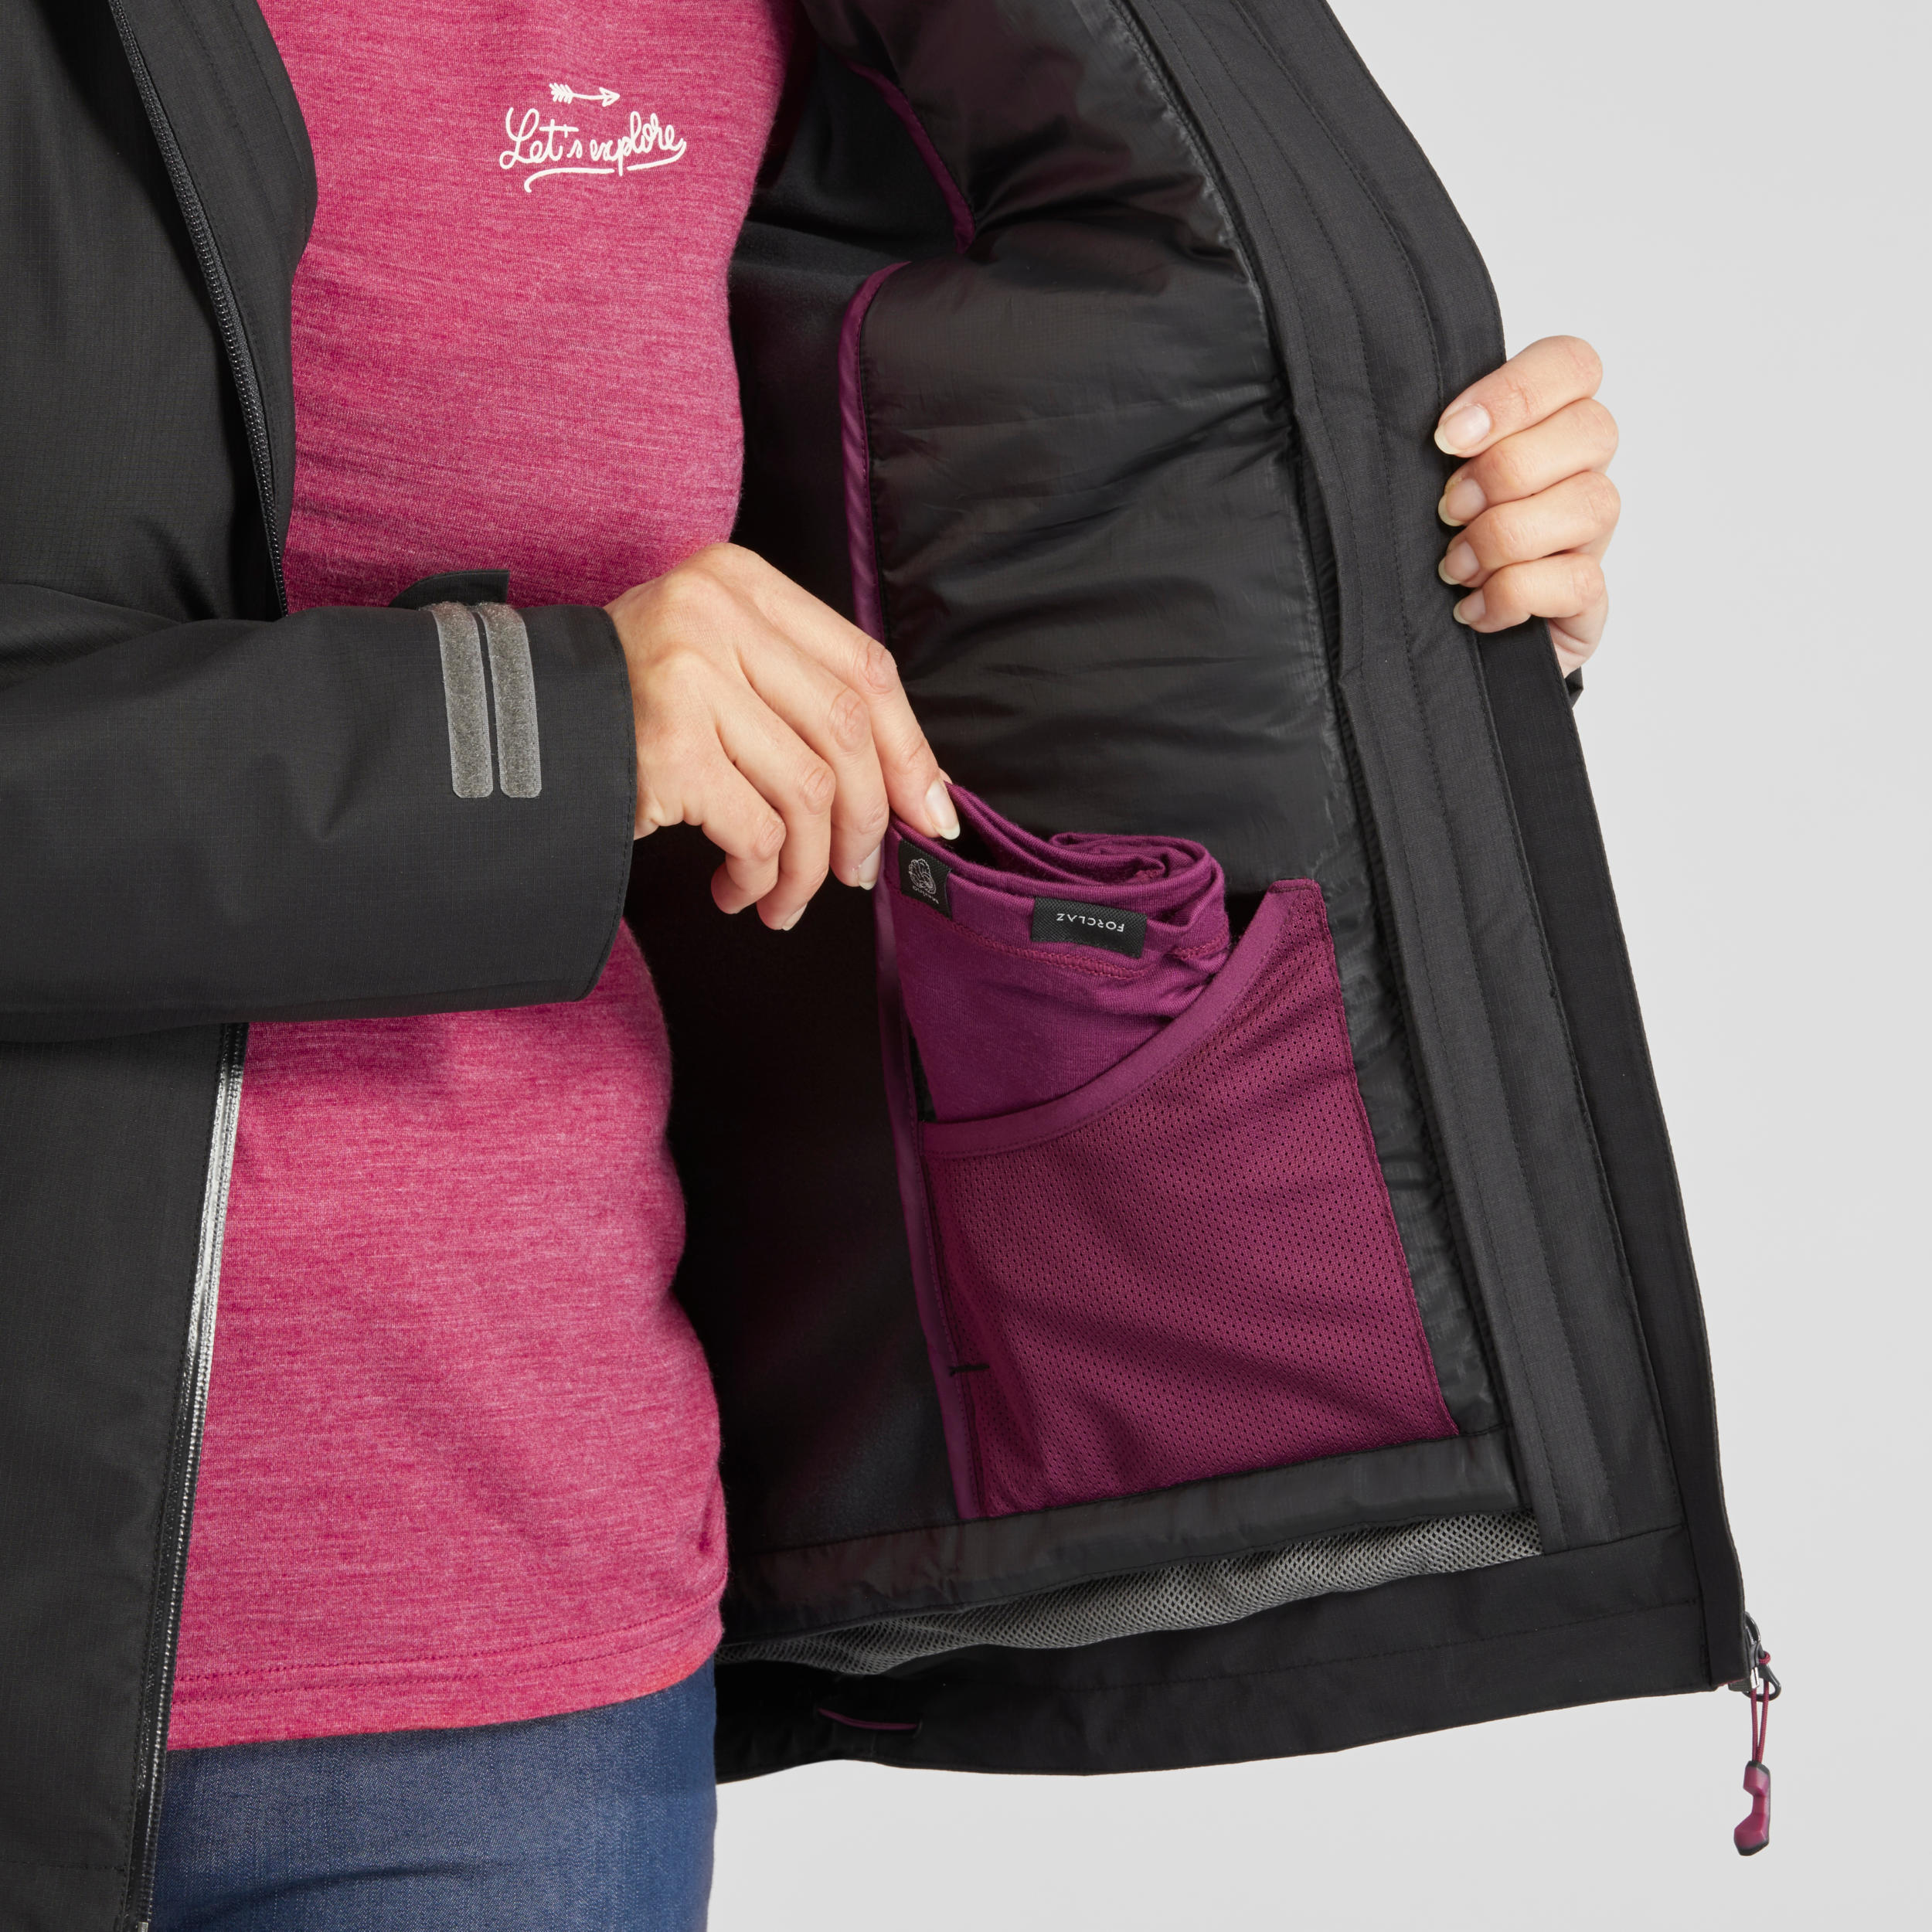 Women’s Hiking 3-in-1 Jacket - Travel 500 Pink - FORCLAZ